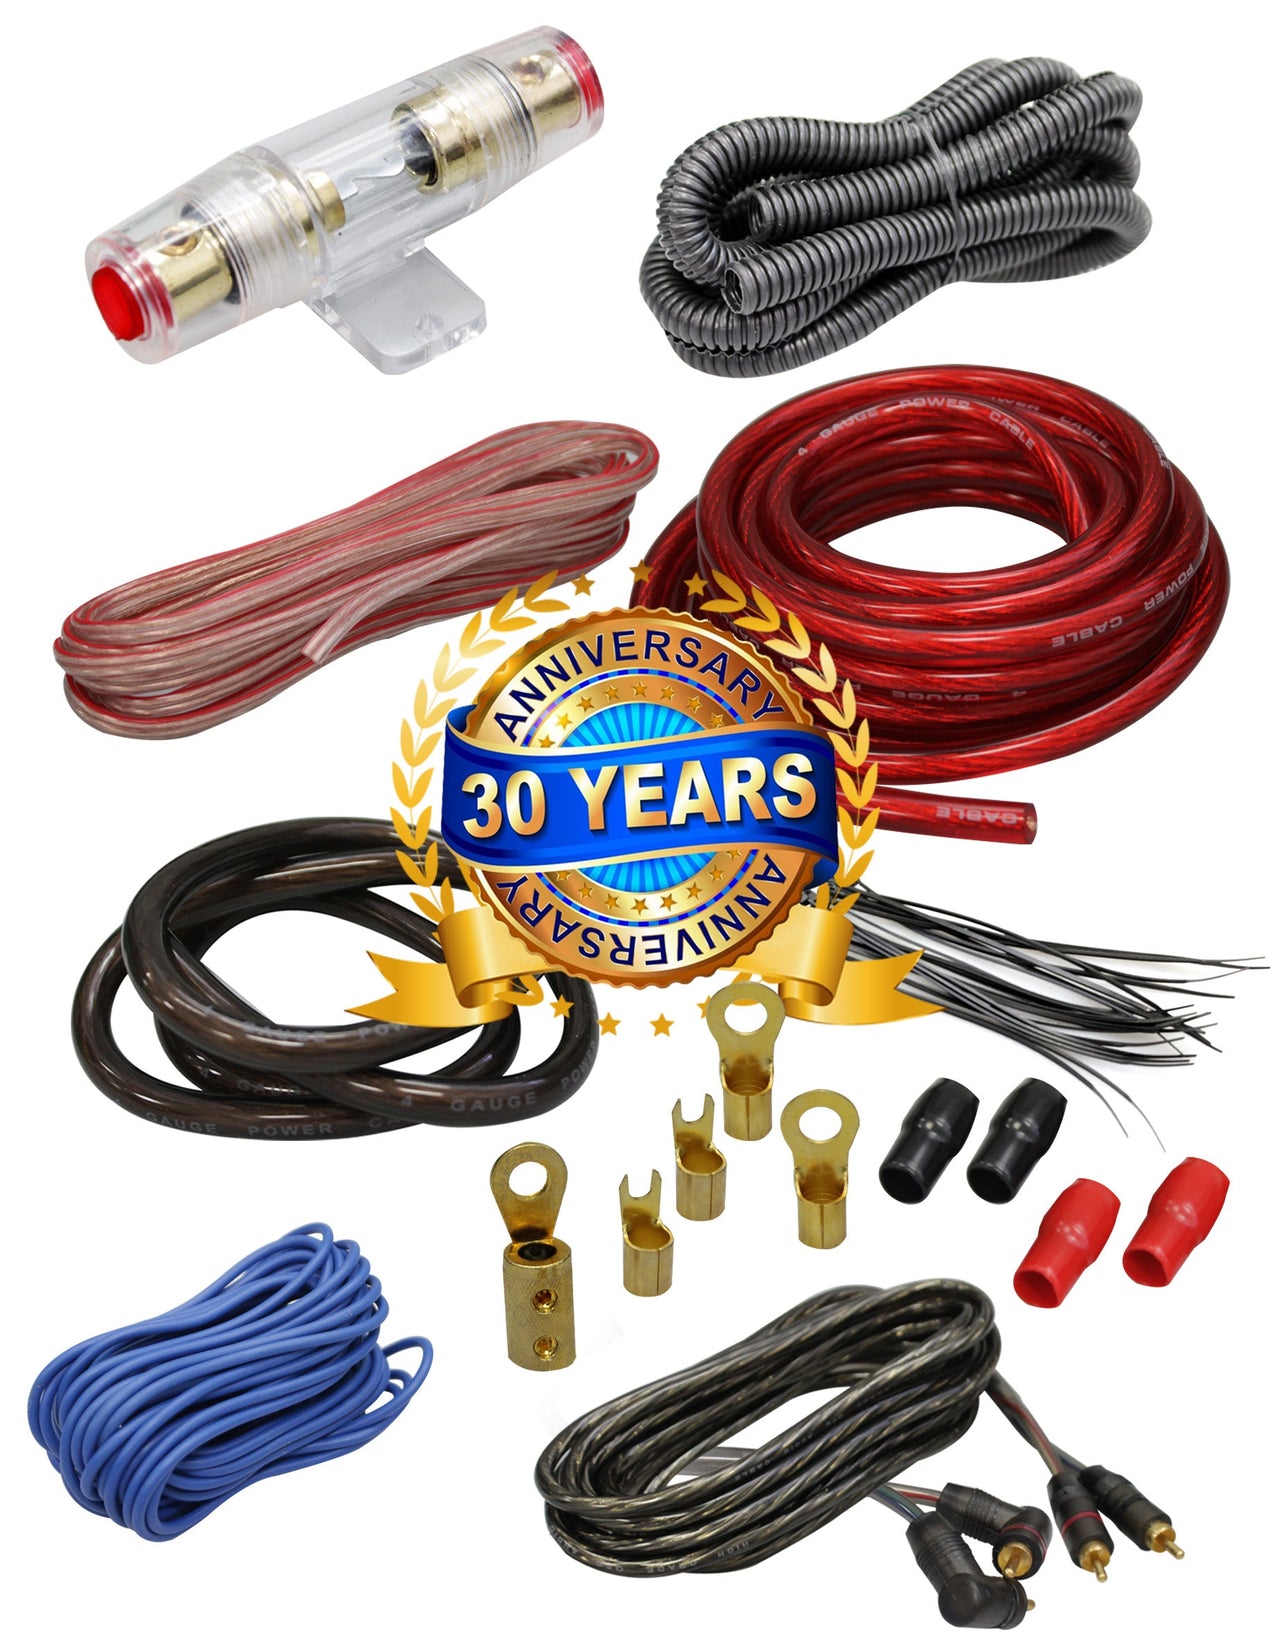 Car Audio  4 Gauge Cable Kit Amp Amplifier Install RCA Subwoofer Sub Wiring New